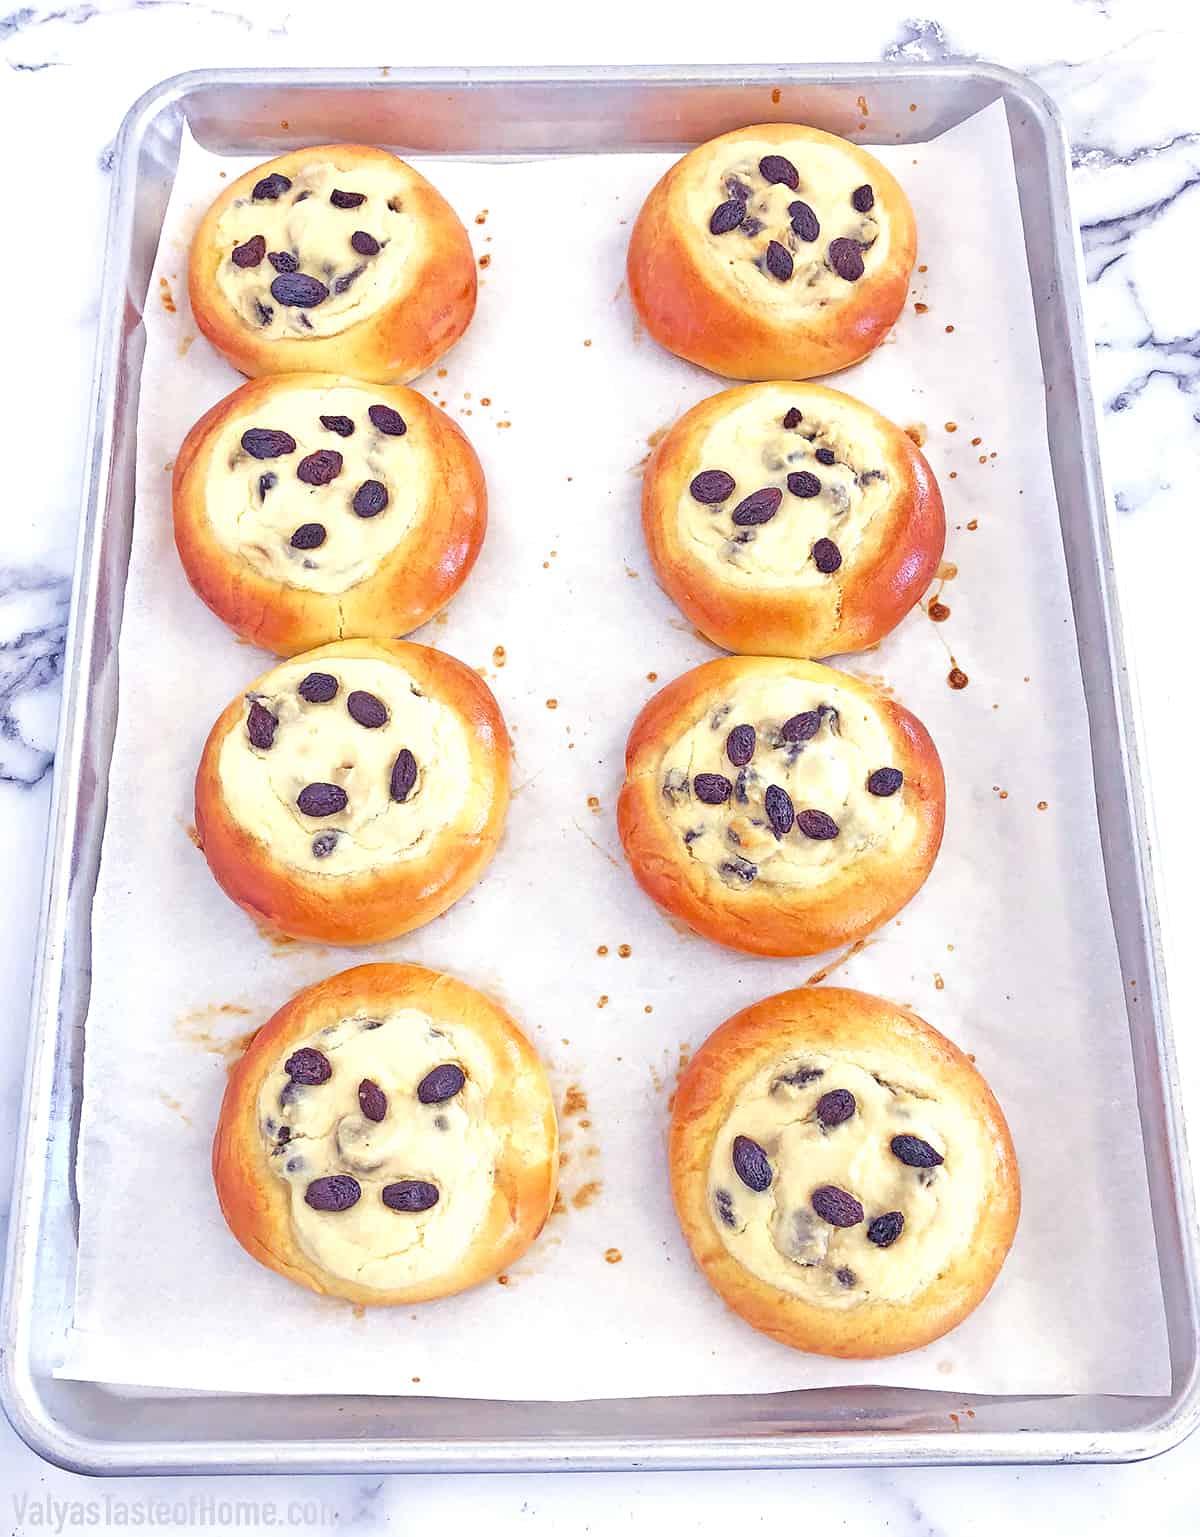 These Sweet Buns with Farmers Cheese and Raisins are made with a slightly sweet yeast dough that is topped with sweet farmer's cheese filling and is very popular in Eastern Europe.